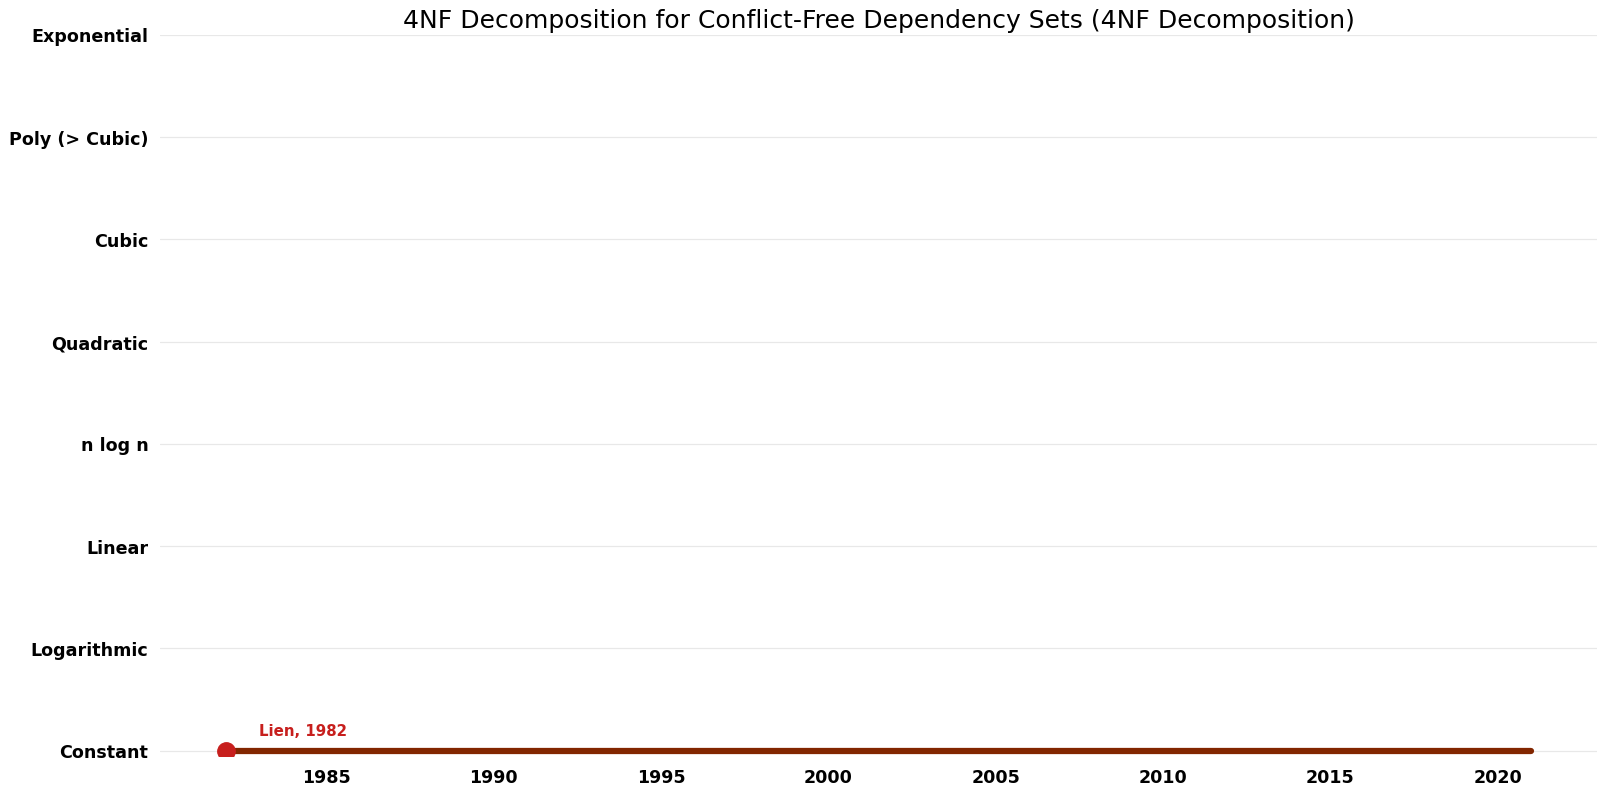 File:4NF Decomposition - 4NF Decomposition for Conflict-Free Dependency Sets - Space.png